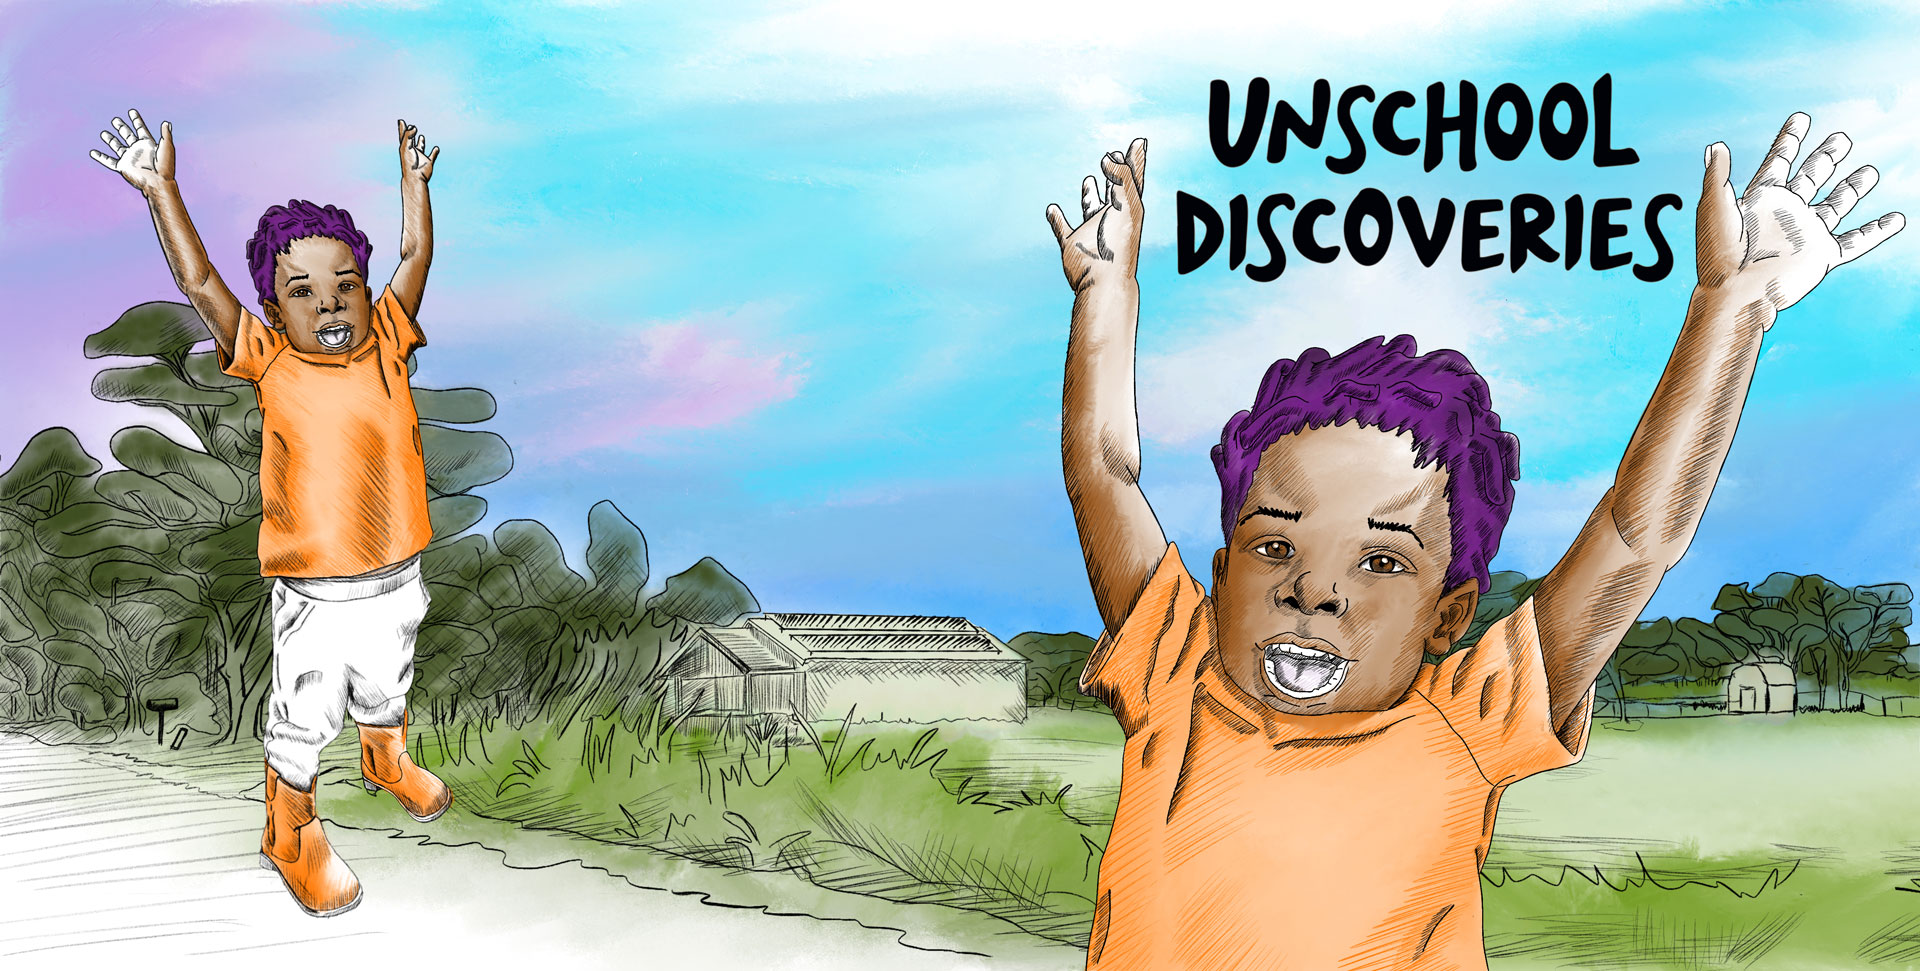 Unschool Discoveries Vol. 2: “Through David’s Eyes” Set for Juneteenth Release